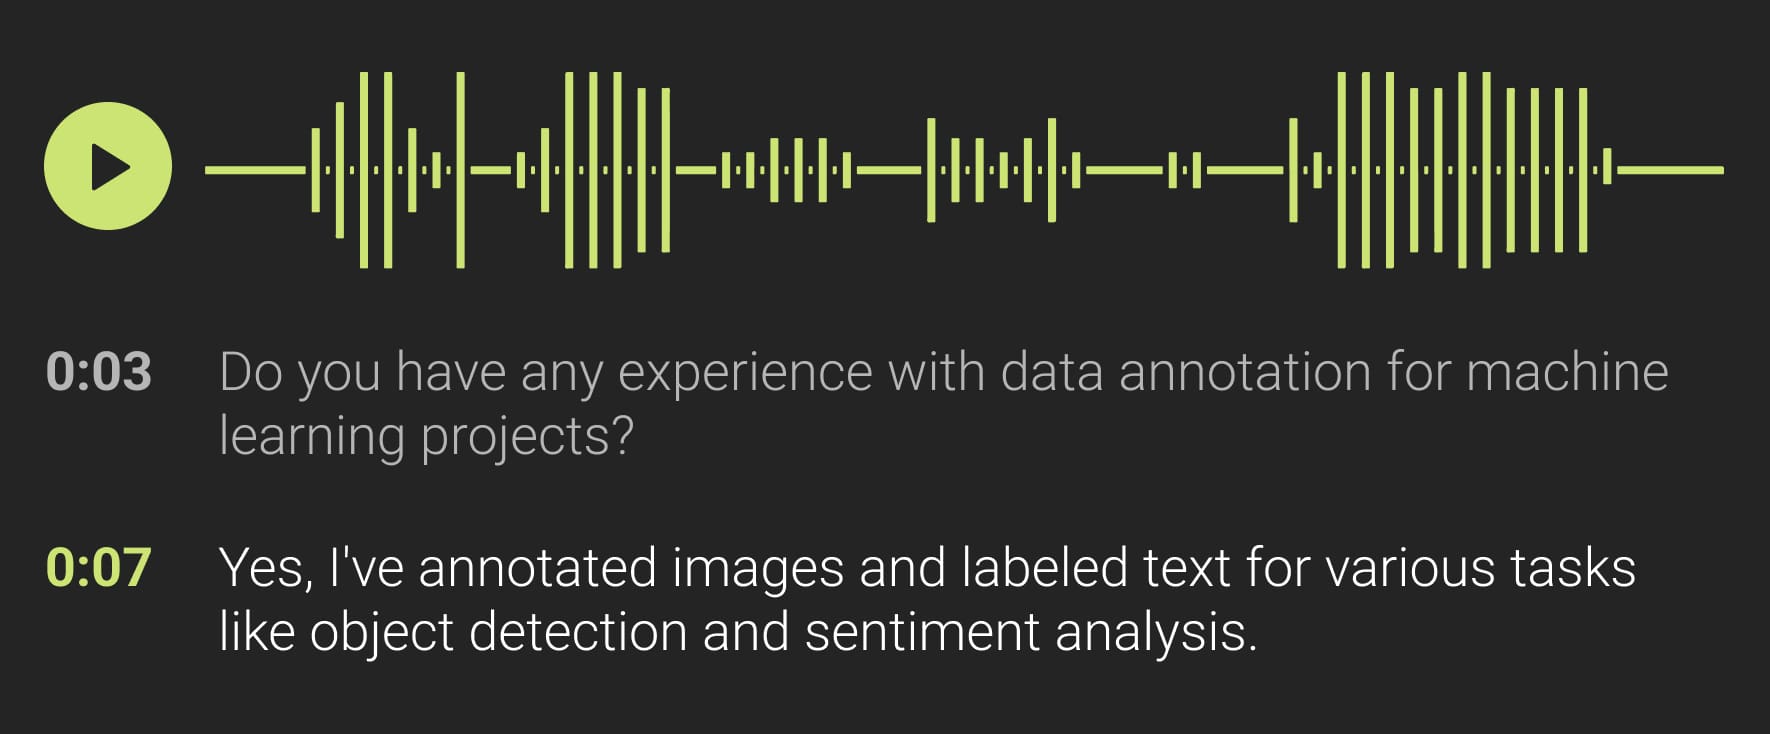 Our skilled team automatically transcribes audio data, such as voice 
                    recordings or podcasts, for easier analysis and data extraction. By converting audio to 
                    text, we can help you better understand customer feedback, streamline your workflow, and 
                    gain insights from audio content